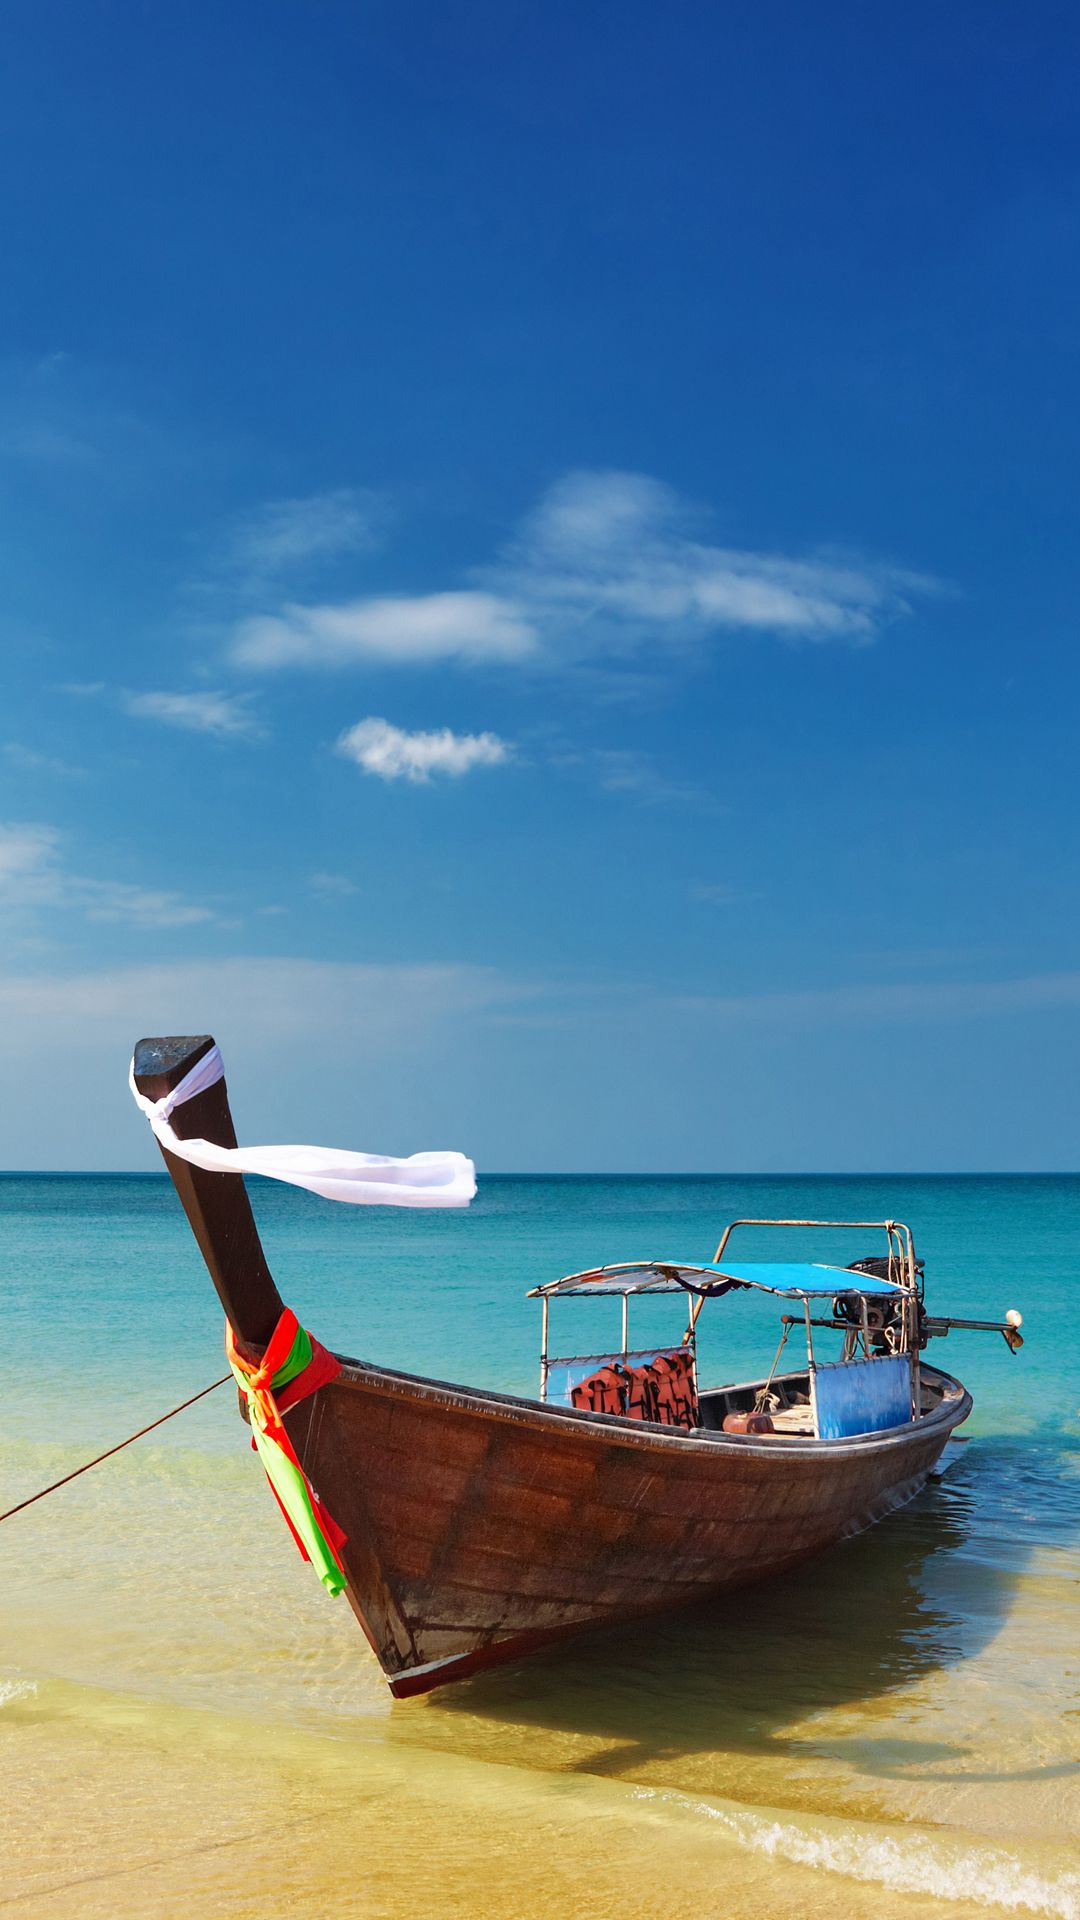 Thailand Beach Shore Boat Android Wallpaper Barcos